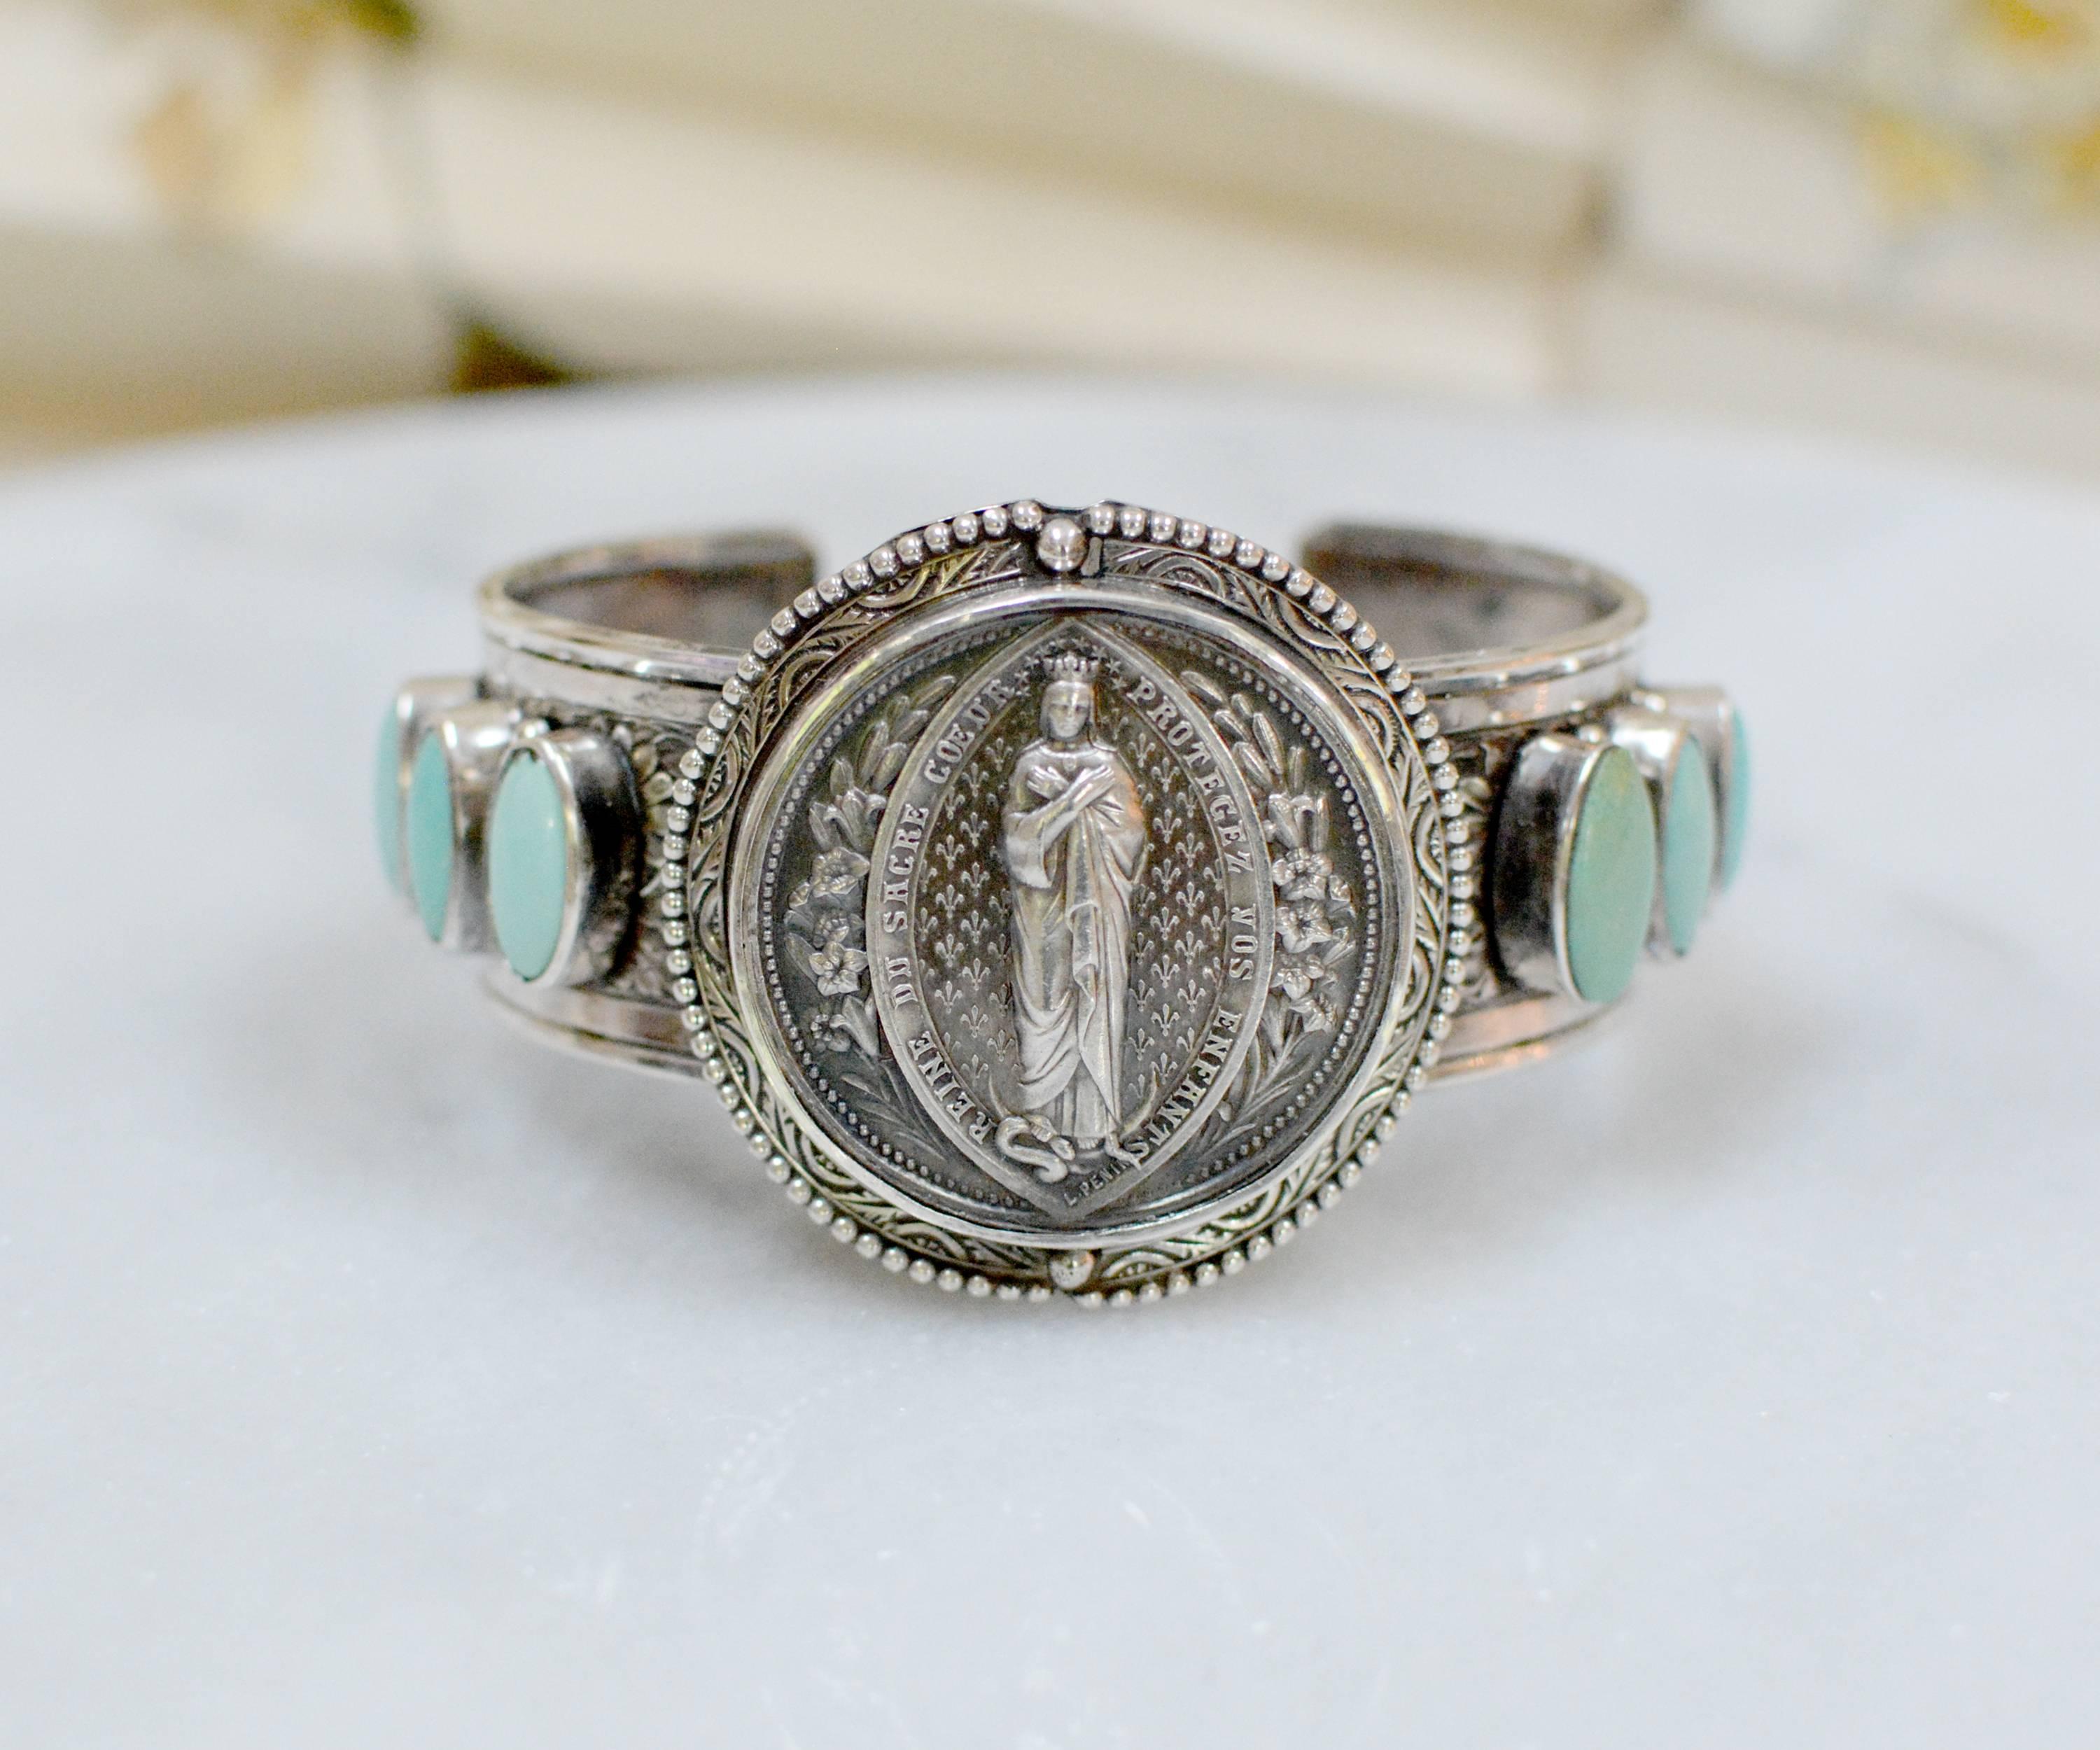 This one of a kind sterling silver cuff bracelet features a very fine, original antique nineteenth century French Sacred Heart Medal gloriously framed with engraving and silver beading. Accenting either side are six 6 x 9 mm robin's egg blue natural